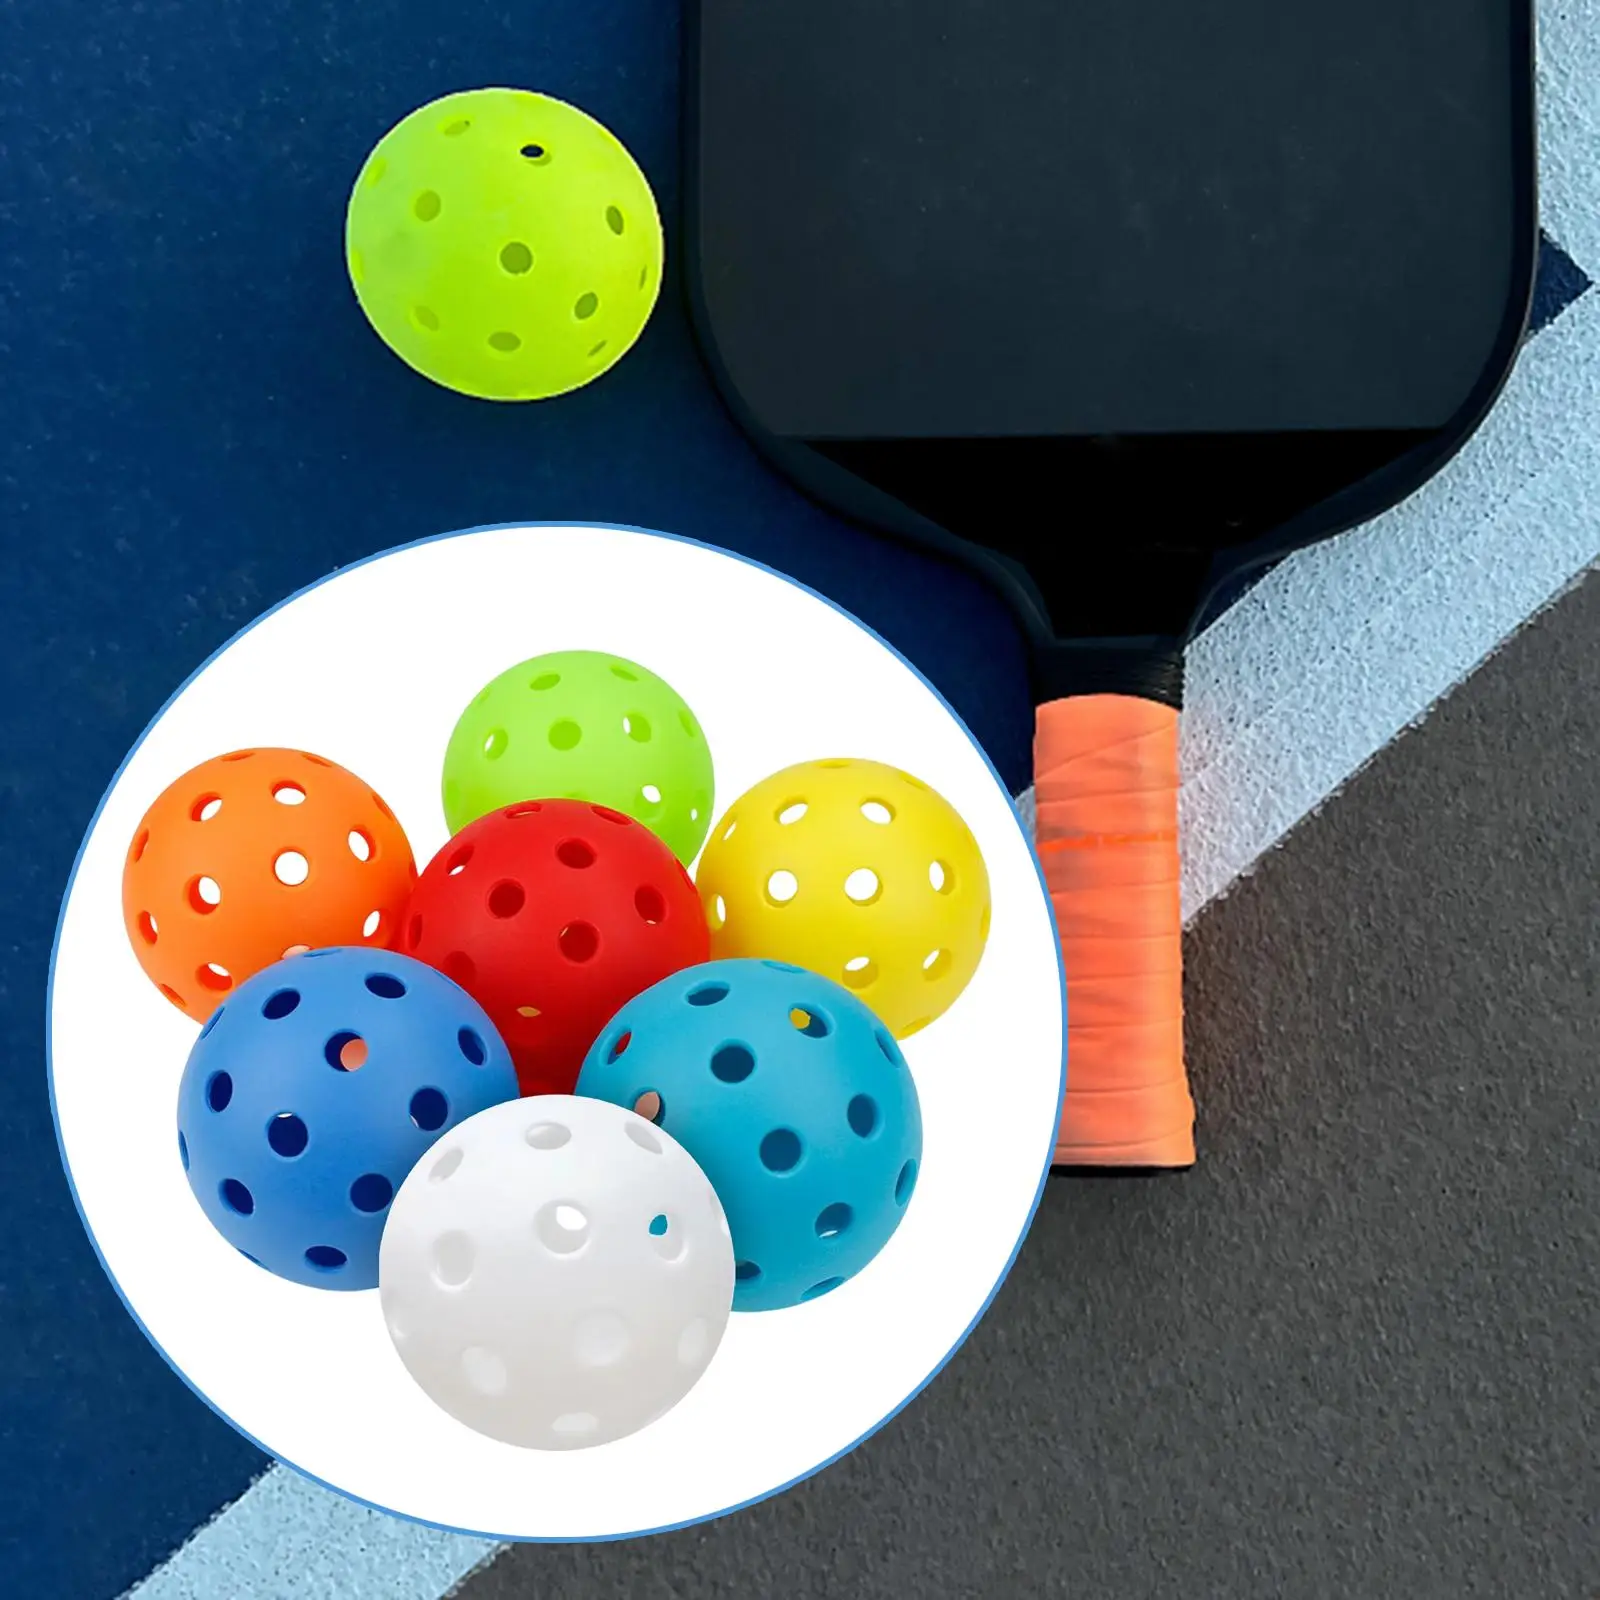 7x Durable Pickleball Balls Professional Quality Pickle Ball 74mm for Indoor Outdoor Sanctioned Tournament Play Adult Practice